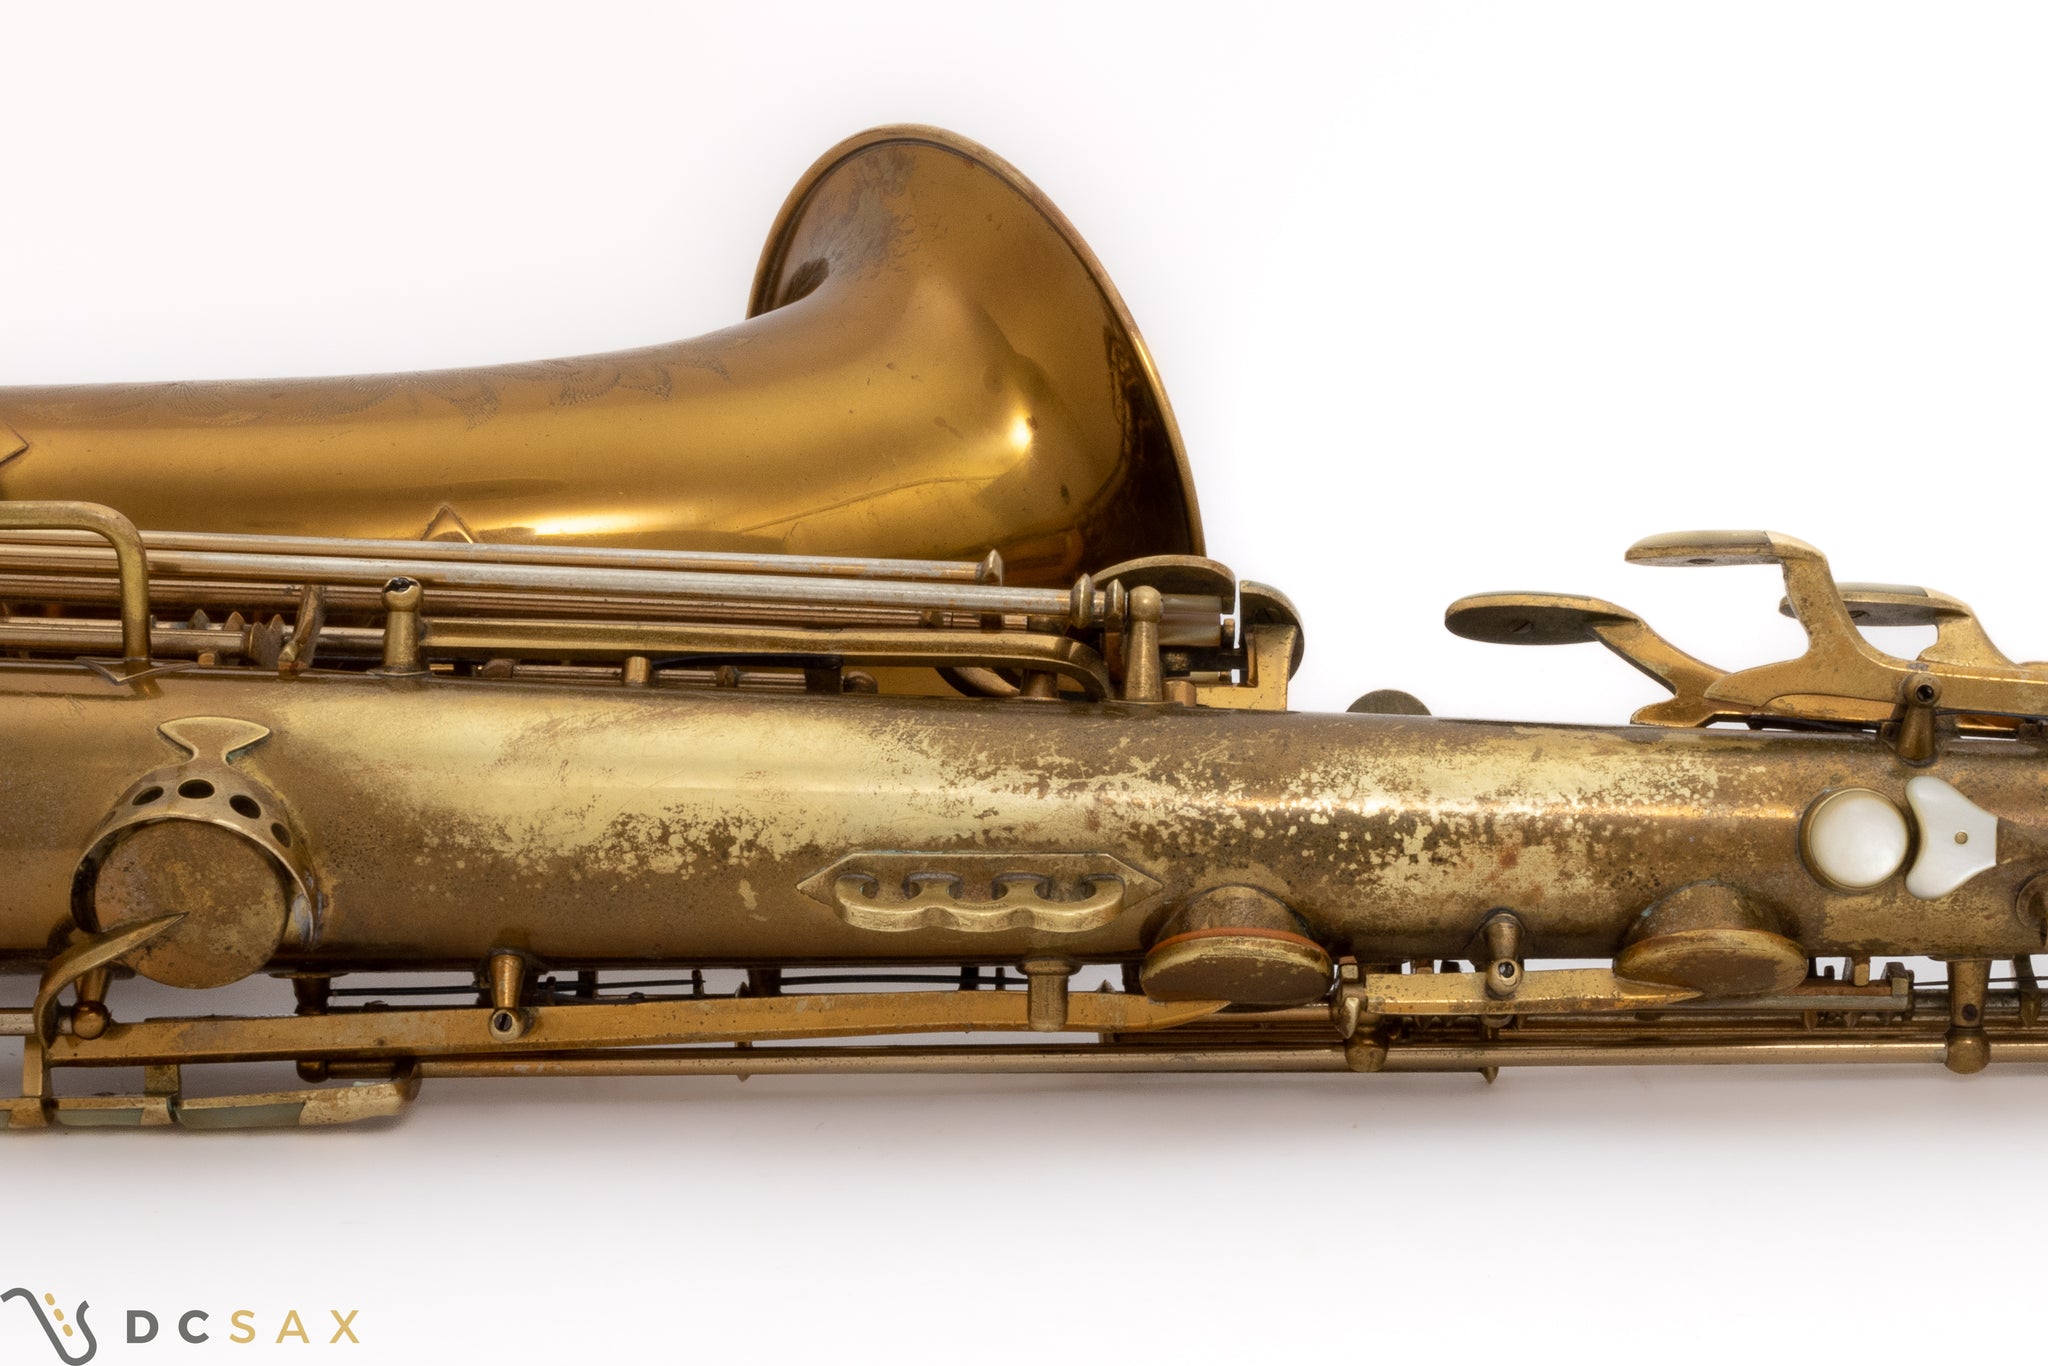 1939 King Zephyr Special Tenor Saxophone, Video, Original Lacquer, Full Pearls, Sterling Neck